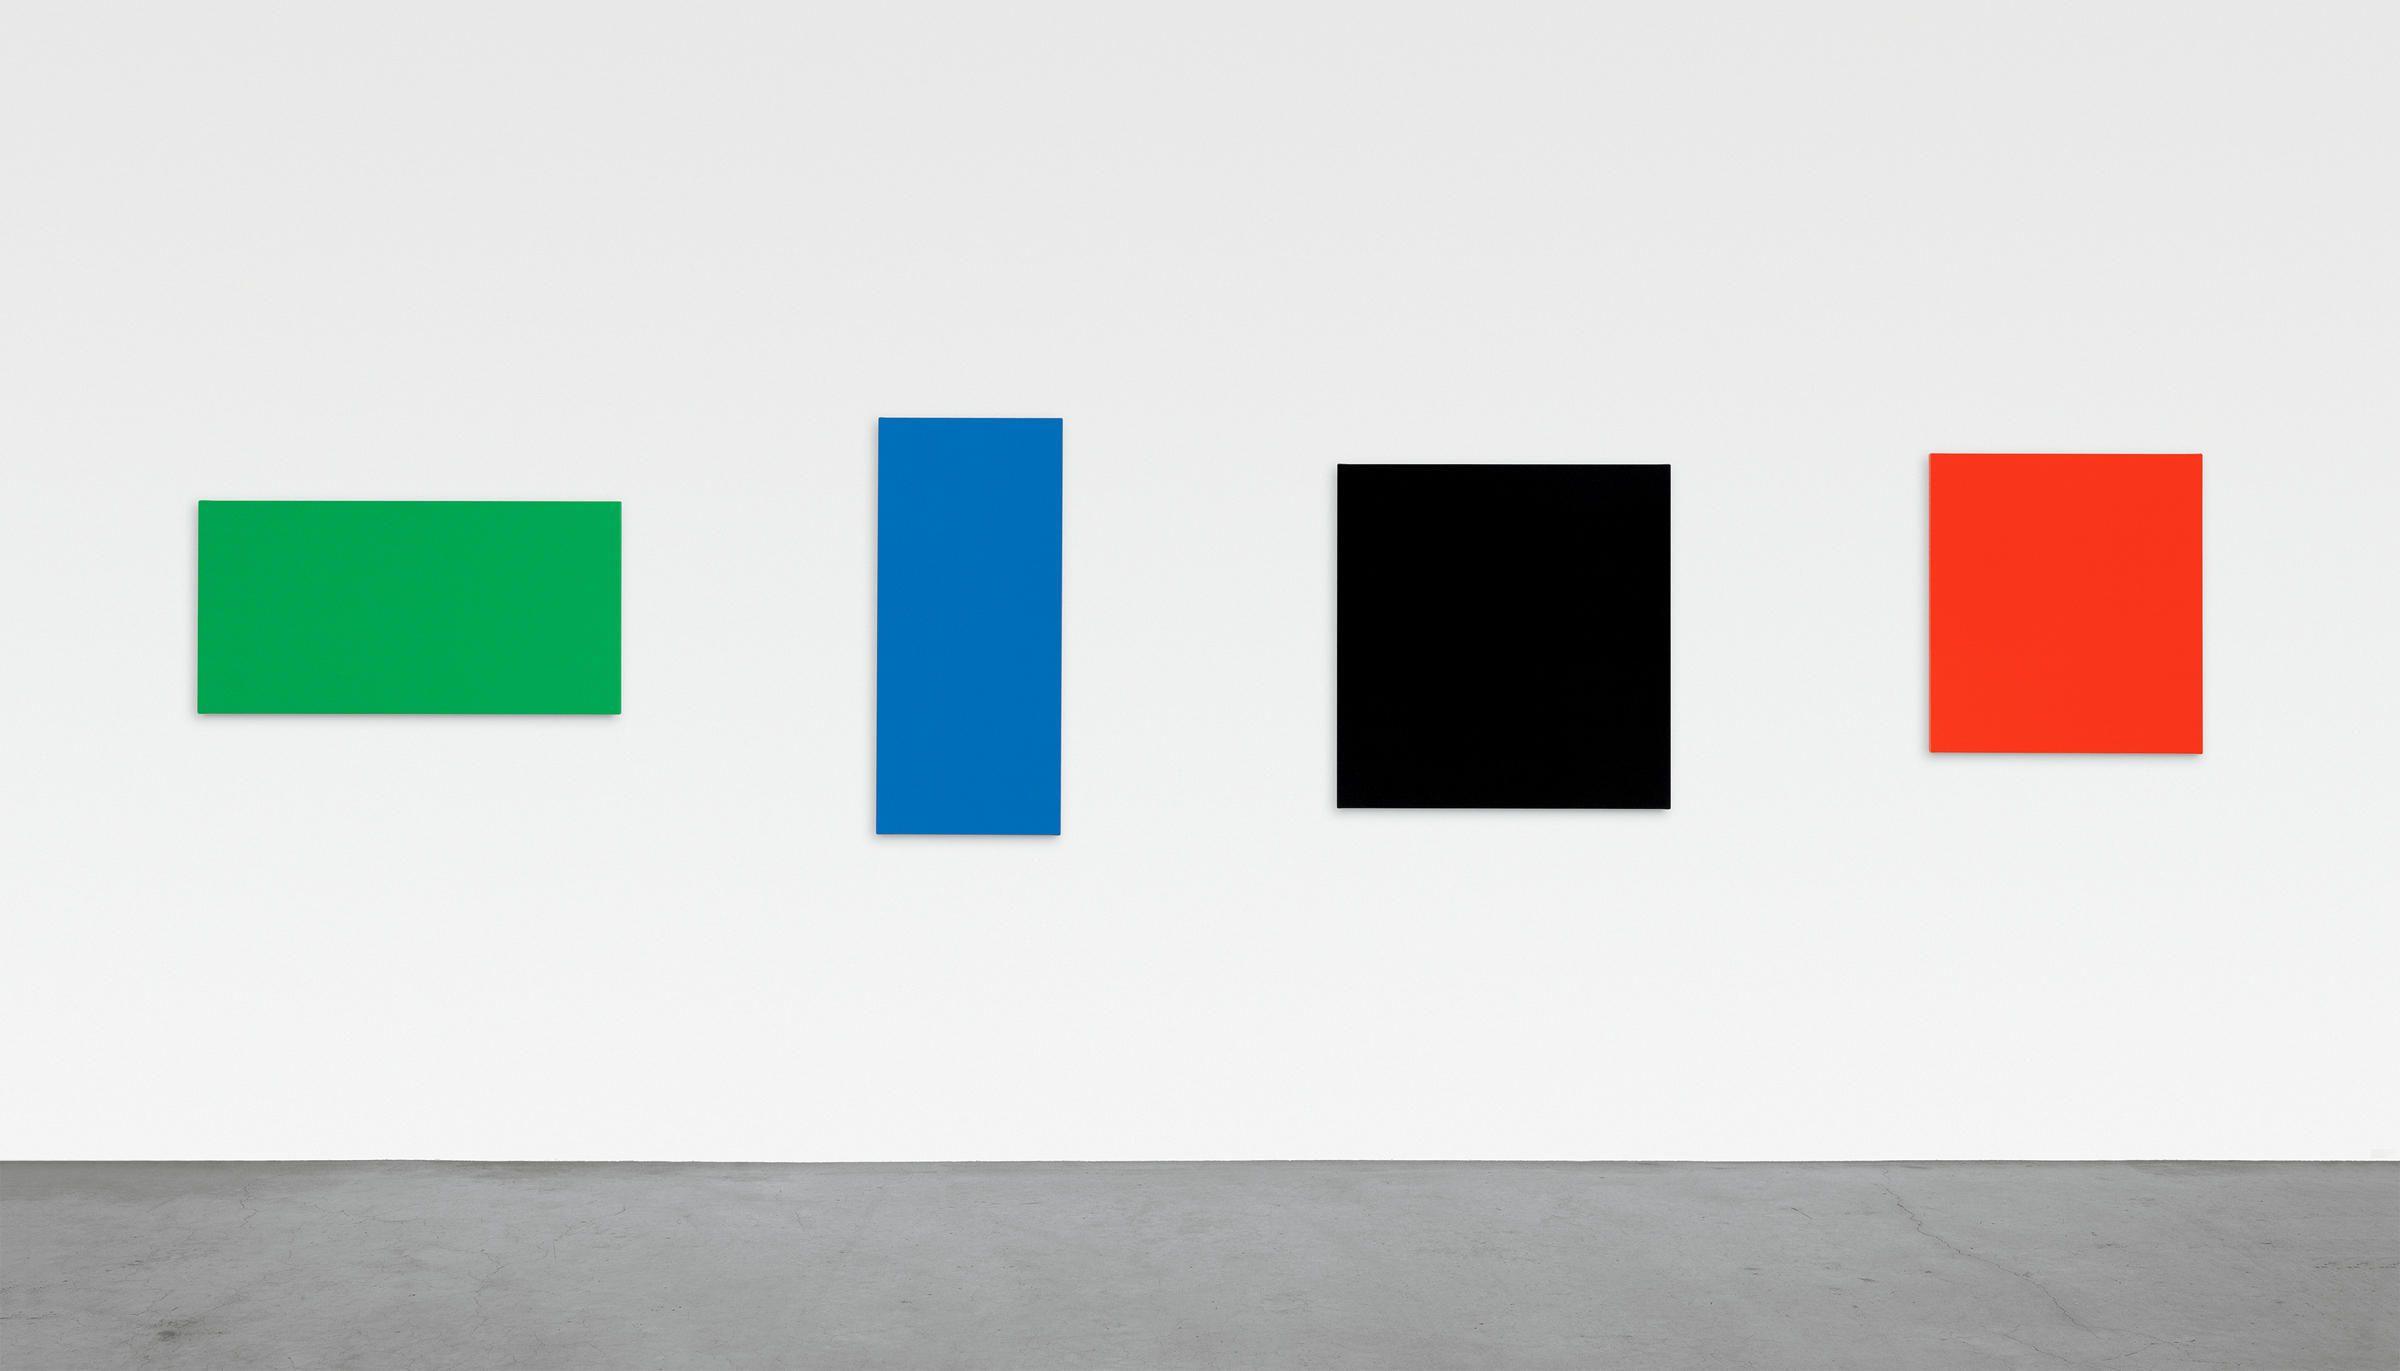 Square Black with Red Rectangle Logo - At 90, Ellsworth Kelly Brings Joy With Colorful Canvases | KERA News